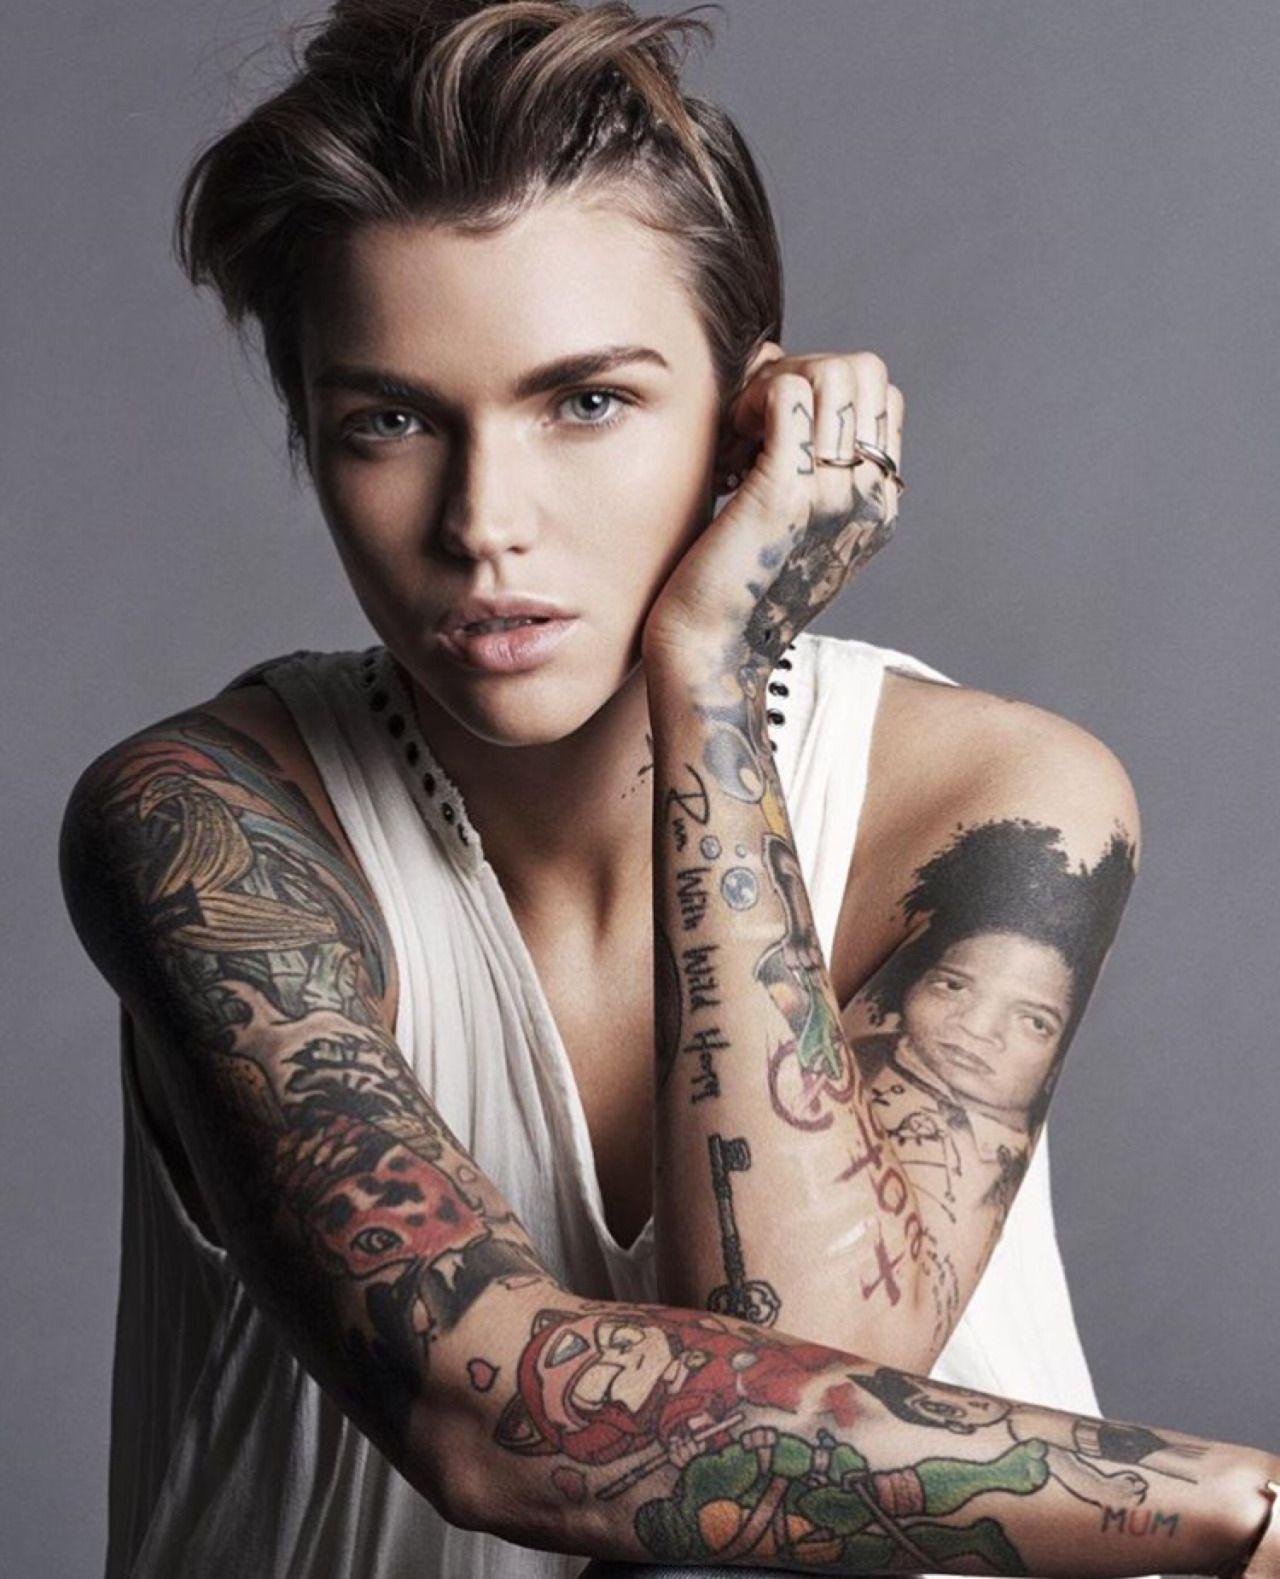 Ruby Rose 2019 Wallpapers - Wallpaper Cave